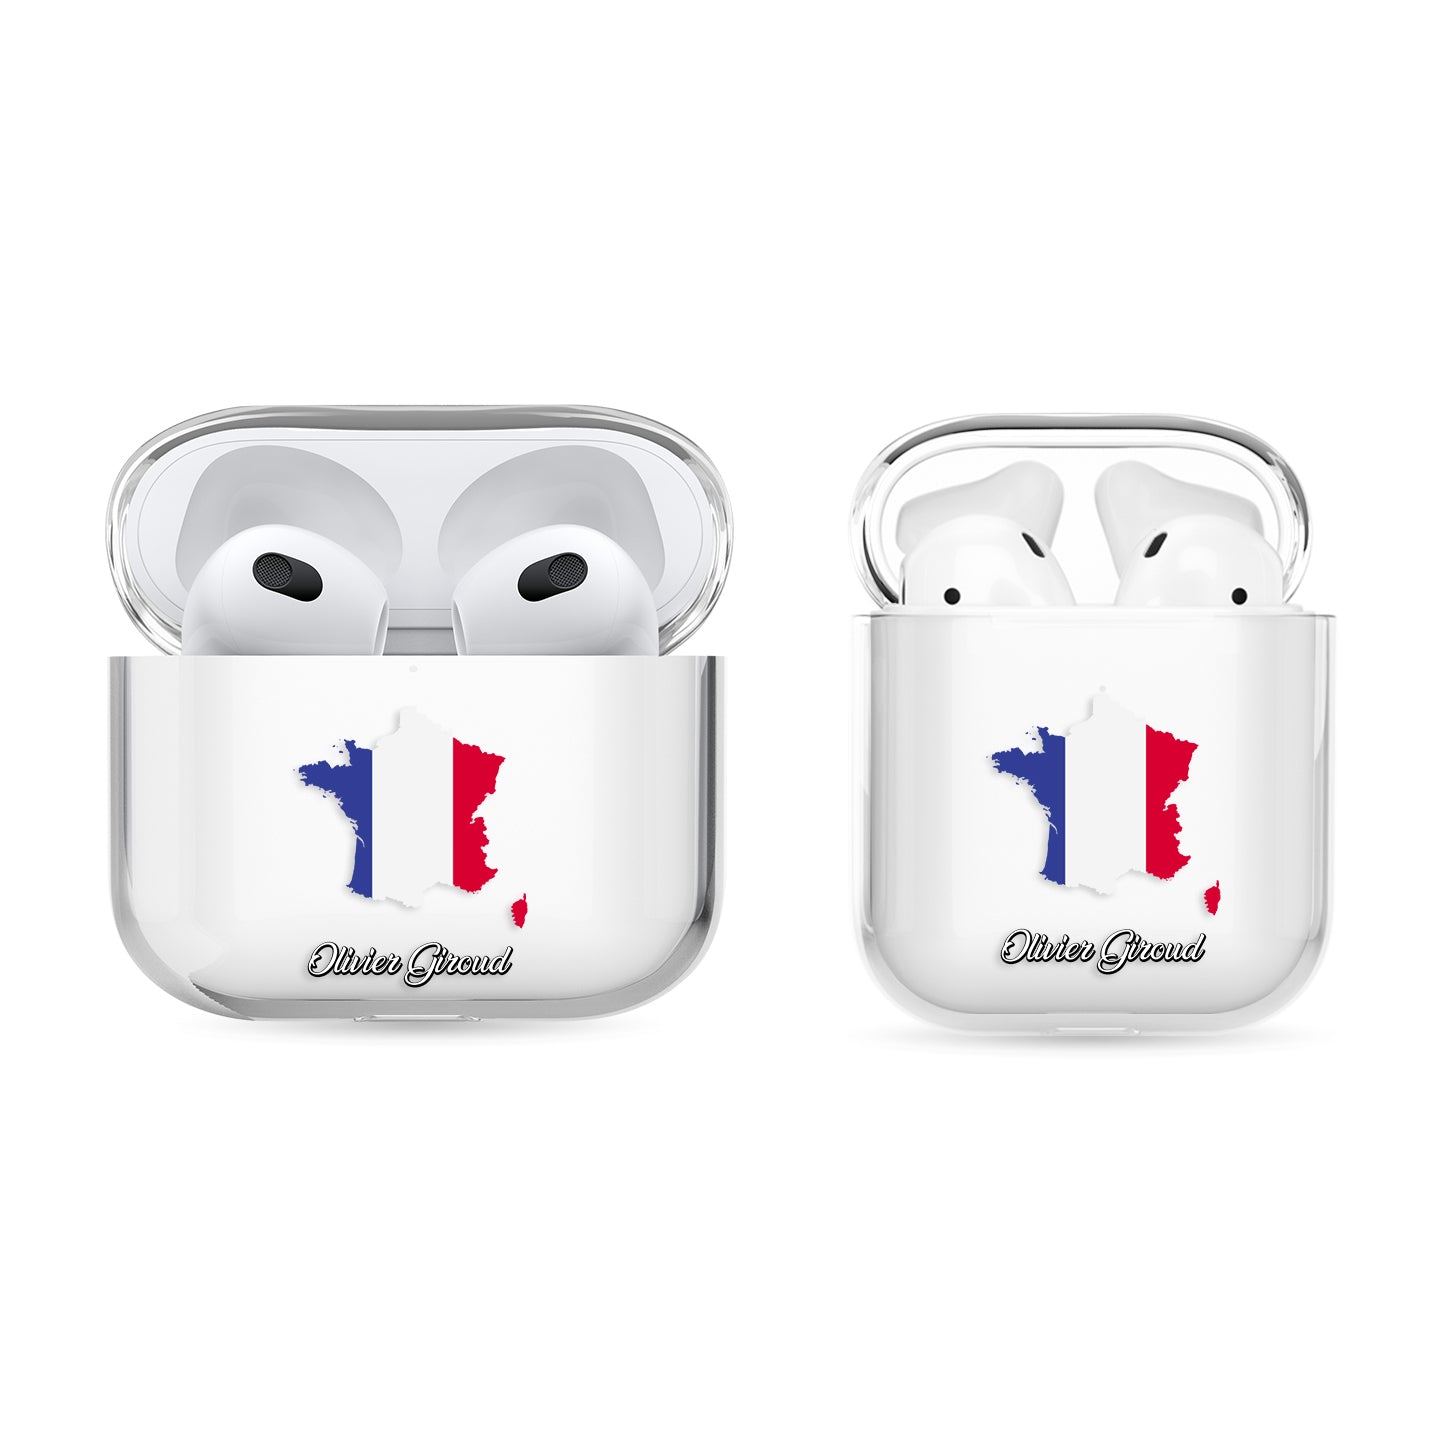 Airpods Hülle - Frankreich Flagge - 1instaphone